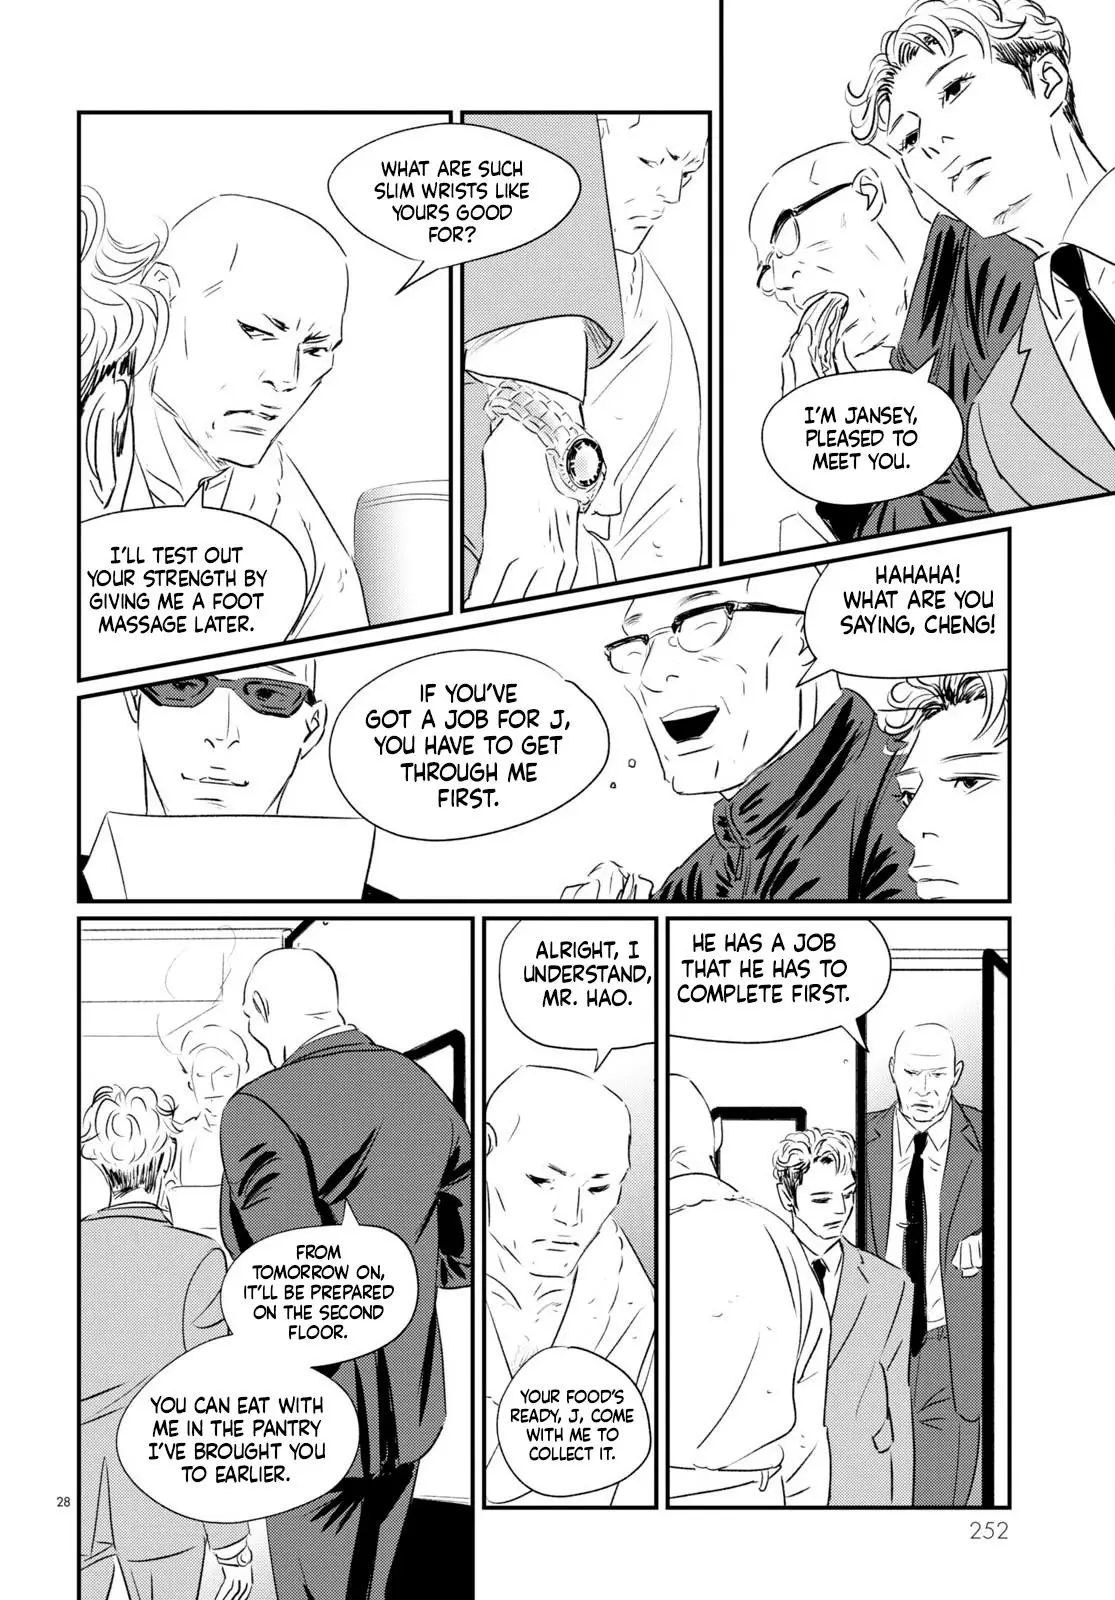 Fish - 7 page 27-0fe90dc6